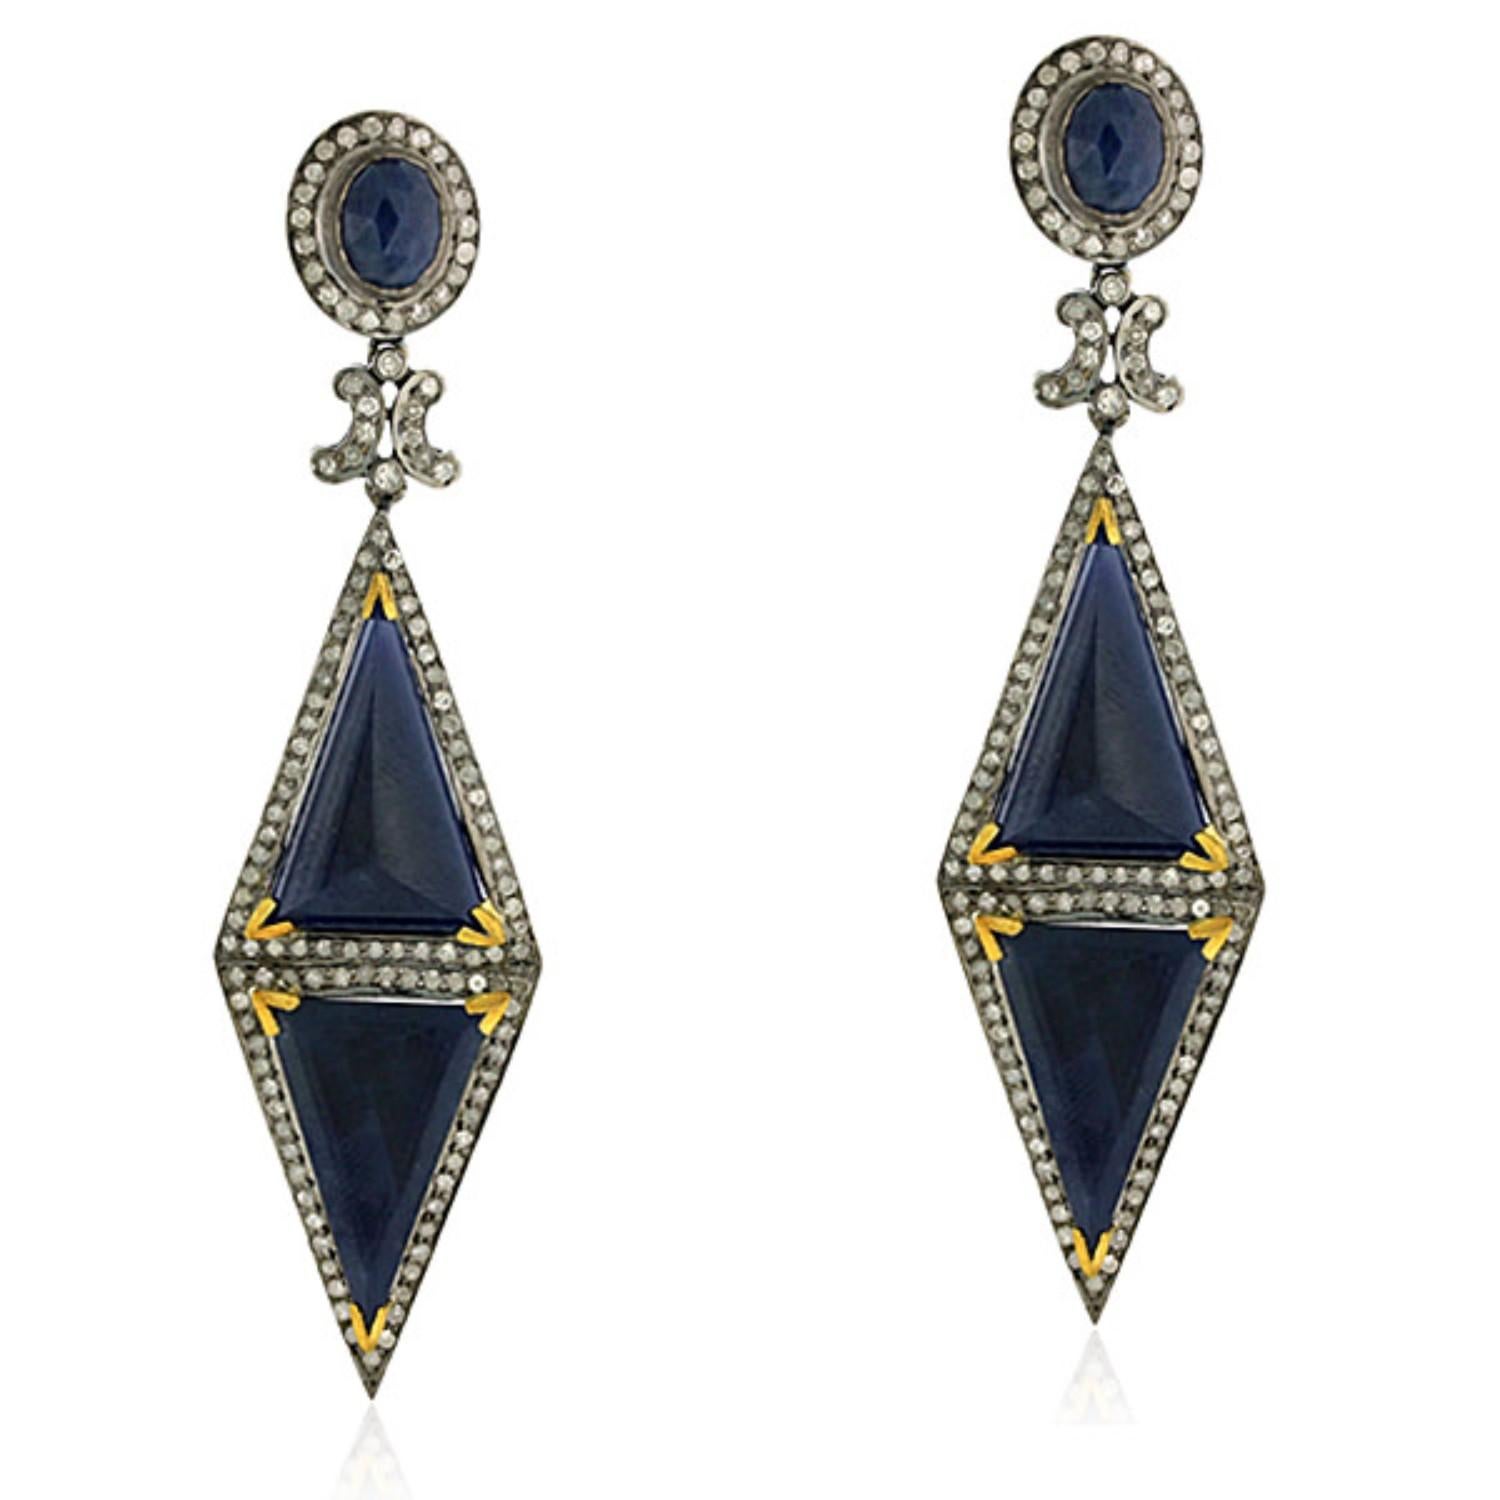 Rhombus Shaped Blue Sapphire Earrings with Pave Diamonds in 18k Gold & Silver In New Condition For Sale In New York, NY